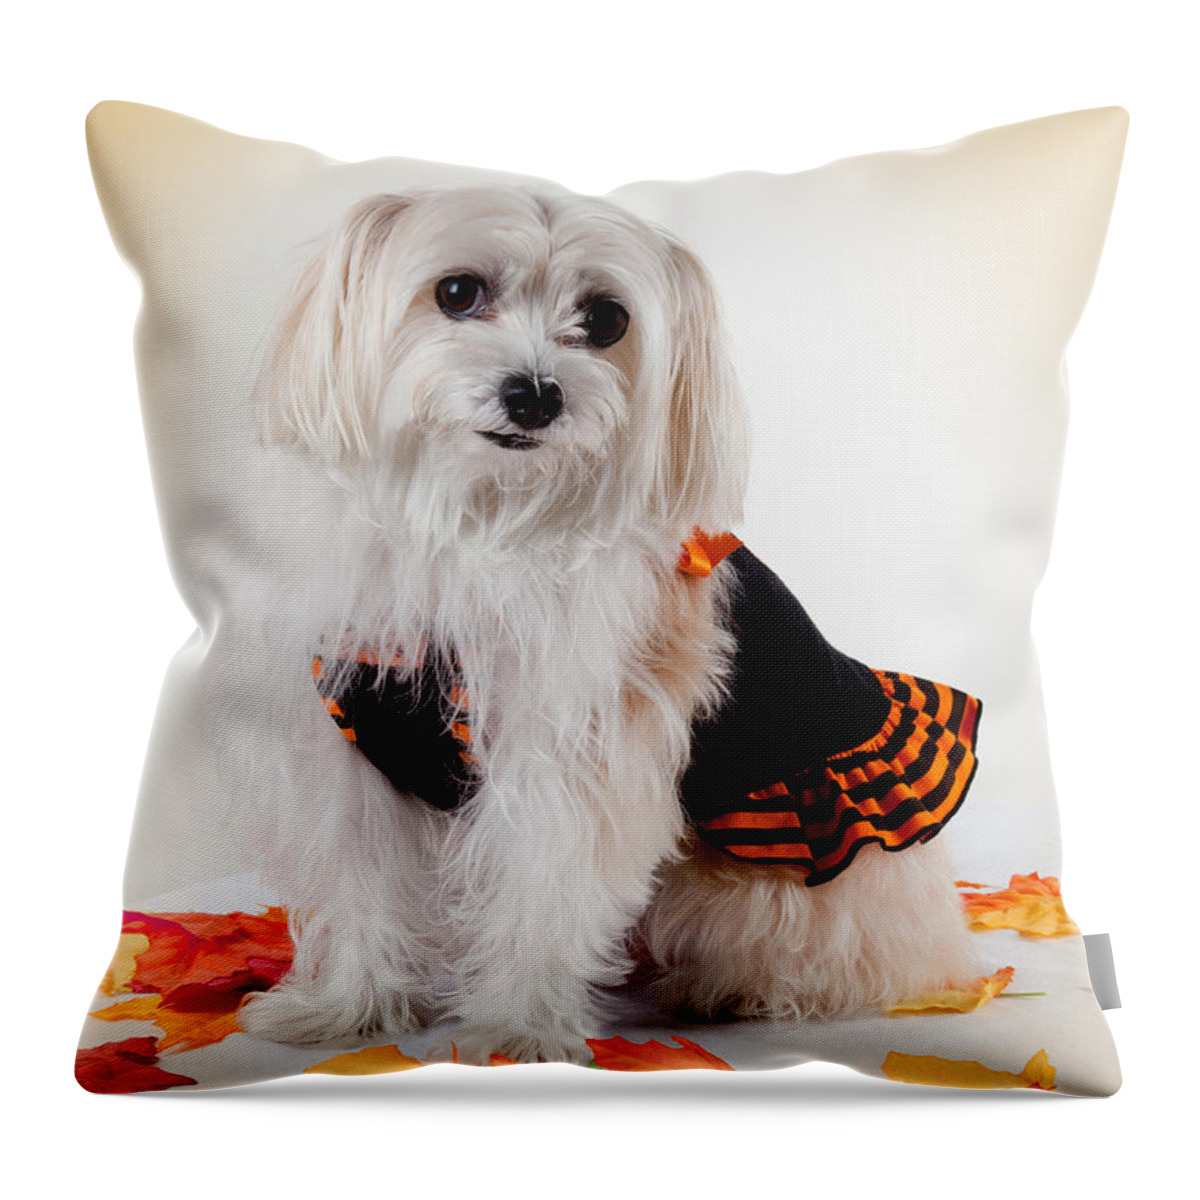 Our Best Friend Throw Pillow featuring the photograph Our Best Friend by Michelle Constantine